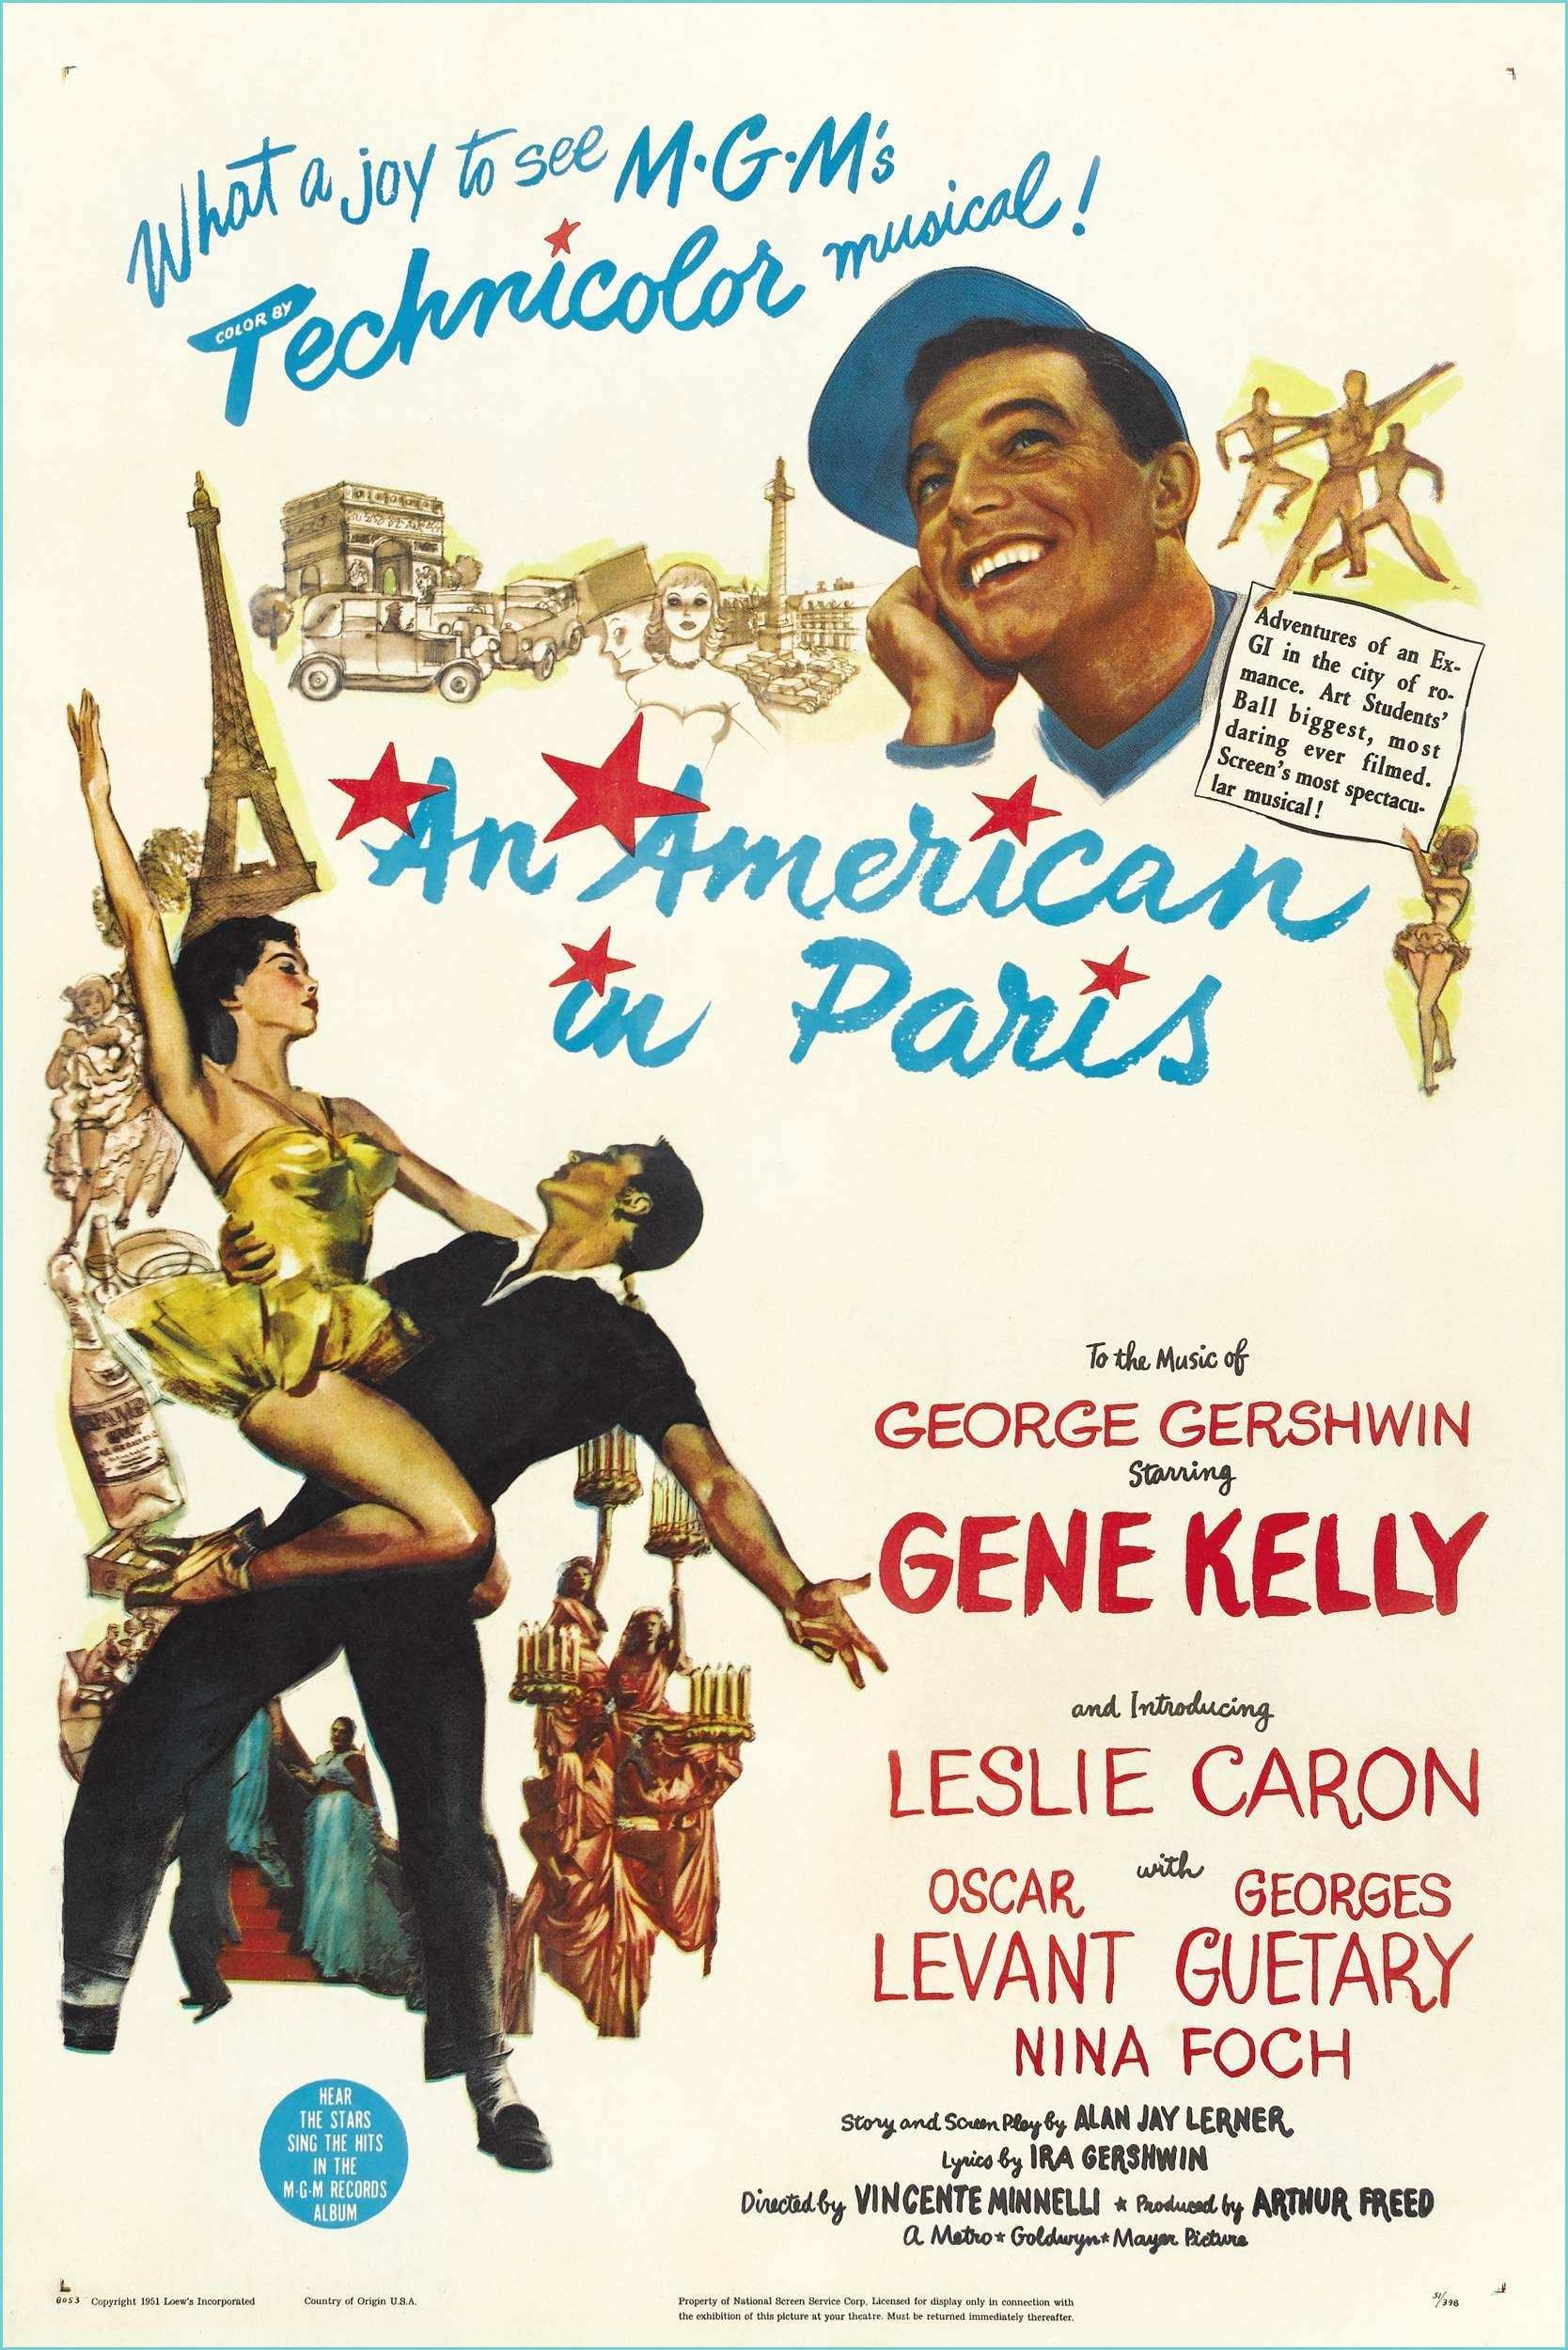 Allposters Return Policy An American In Paris" 1951 Country United States Director